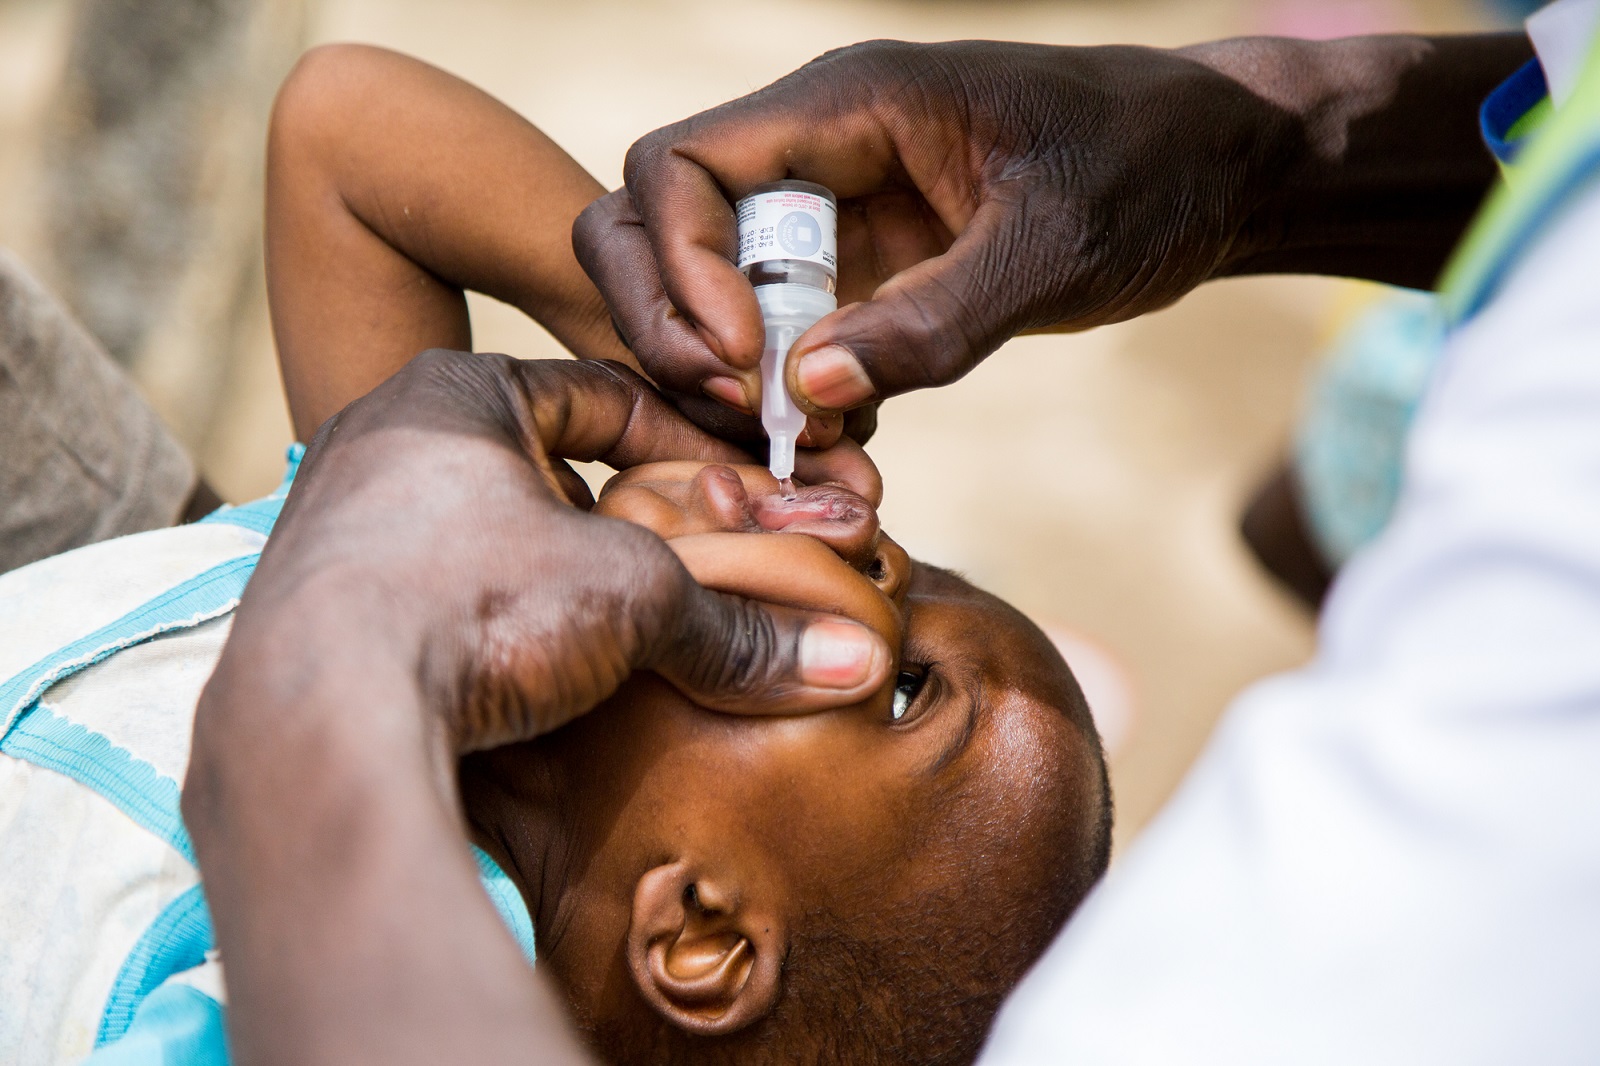 Seven-month-old Tamaiariss is given a polio vaccine during a door to door vaccine campaign in the Zaikai district in Maroua, Cameroon.